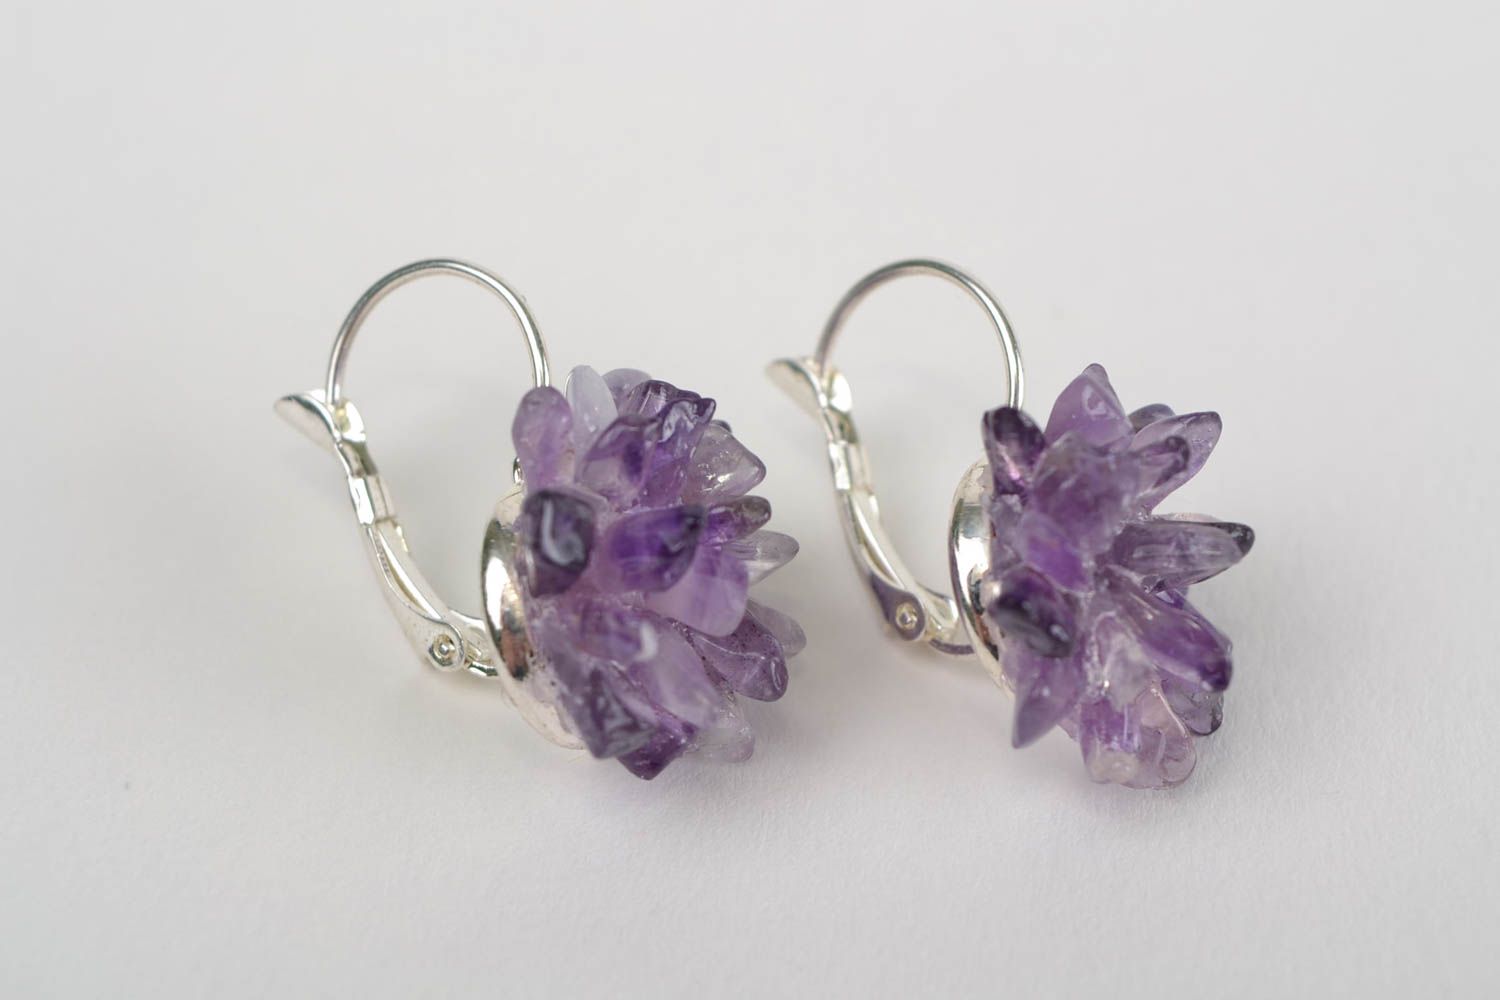 Lilac beautiful handmade earrings with amethyst stones in the shape of flowers photo 3